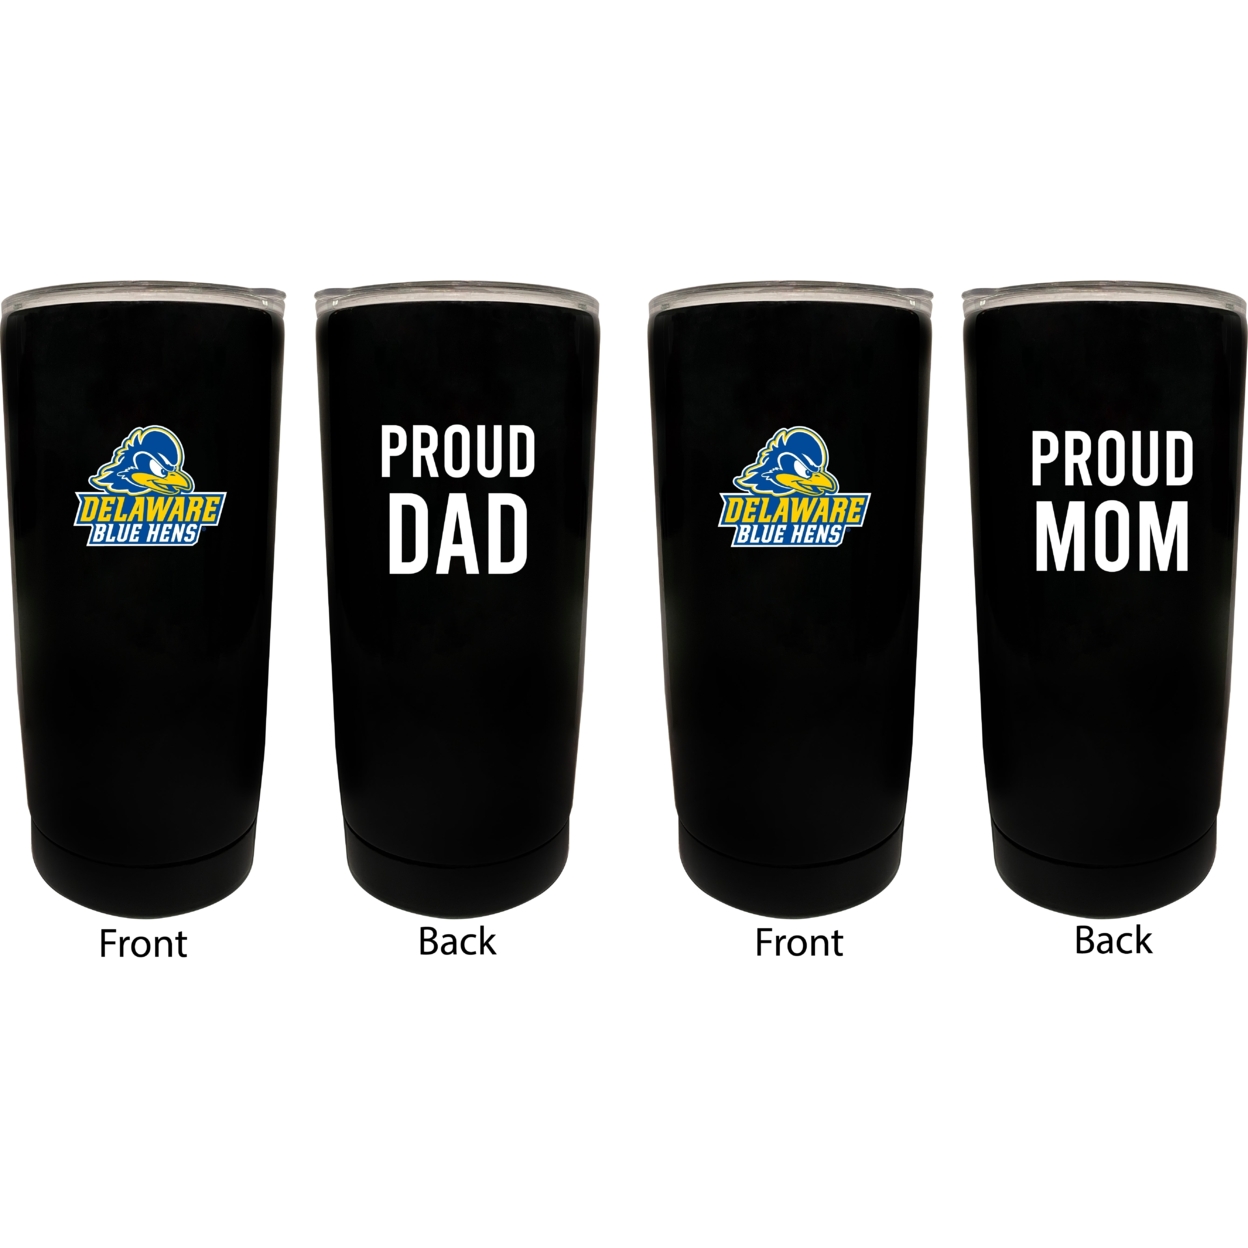 Delaware Blue Hens Proud Mom And Dad 16 Oz Insulated Stainless Steel Tumblers 2 Pack Black.